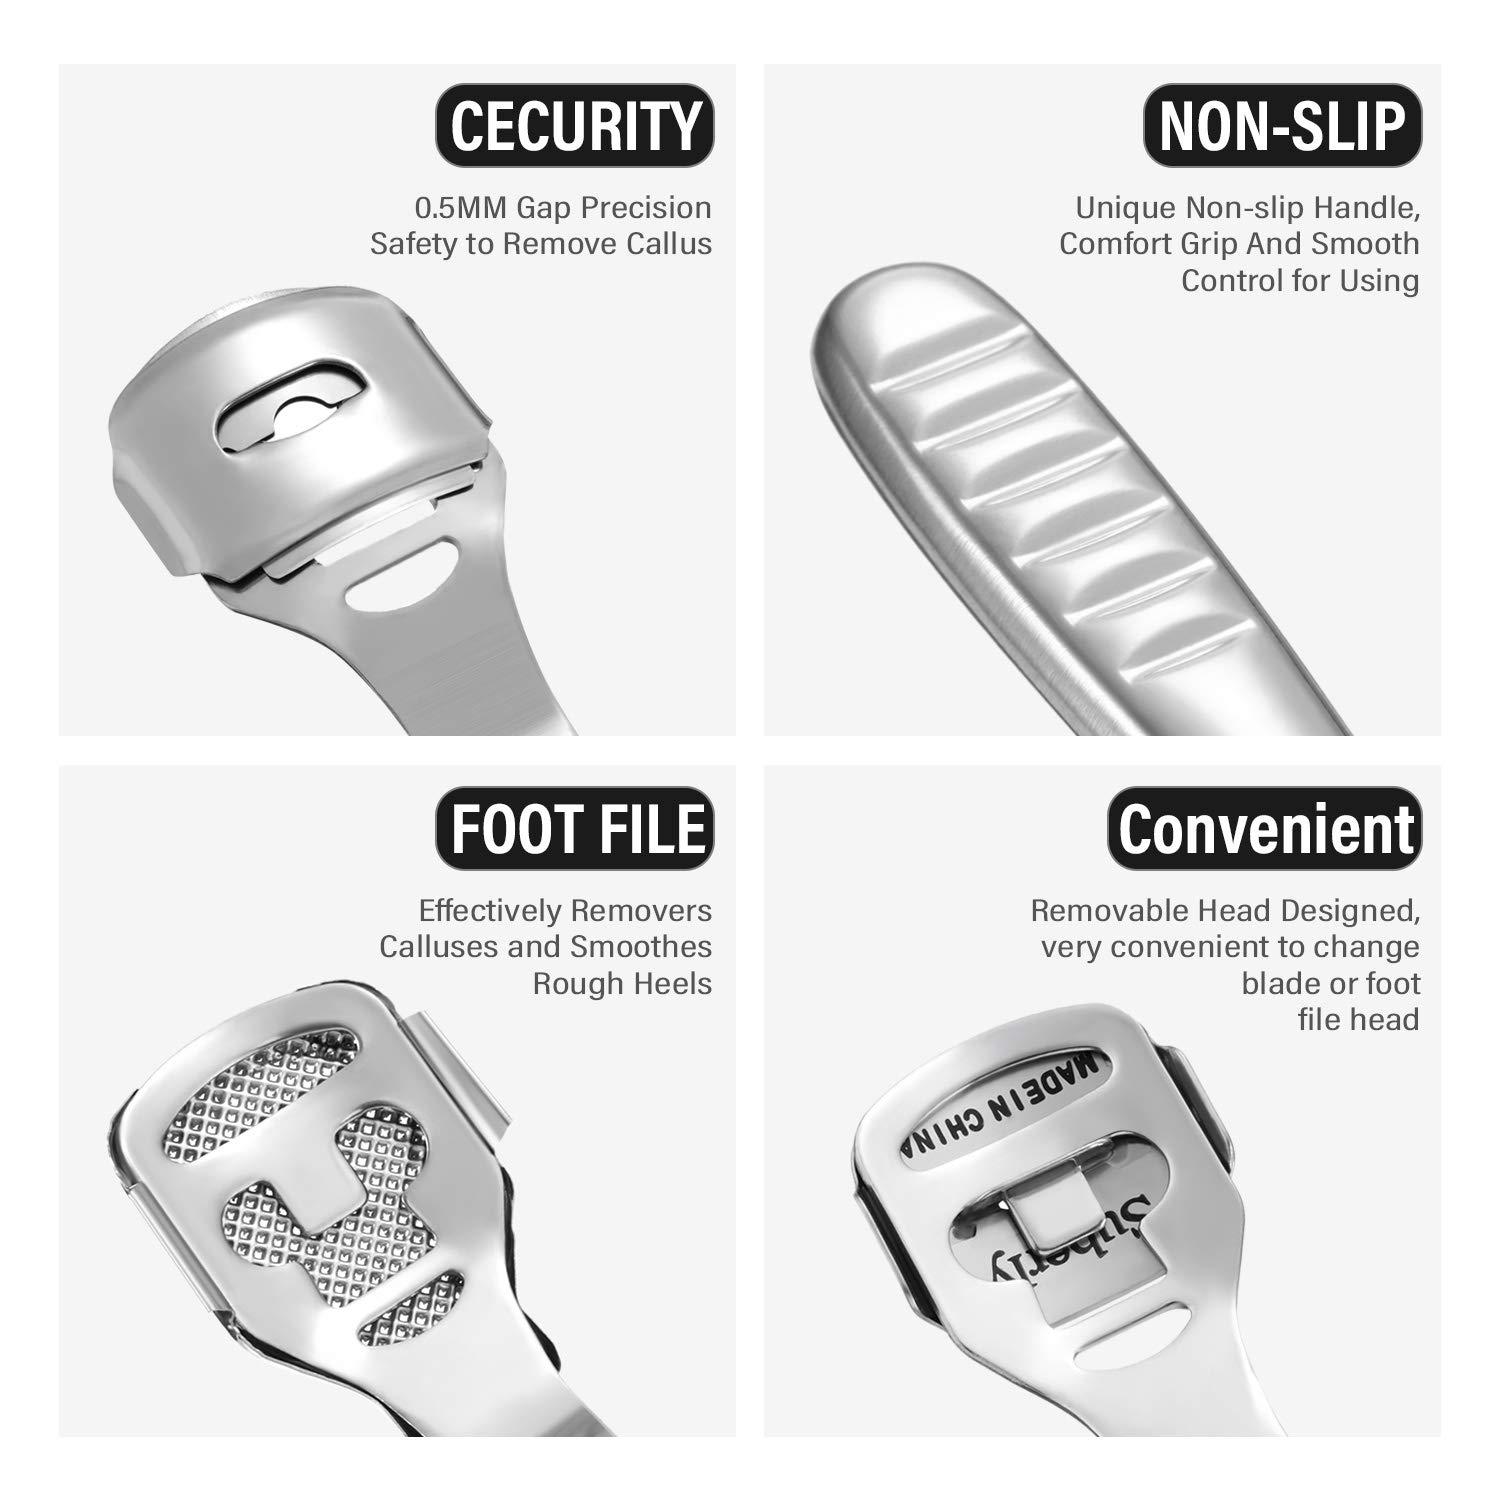 New Stainless Steel Foot Skin Shaver & Foot Care Tool For Callus